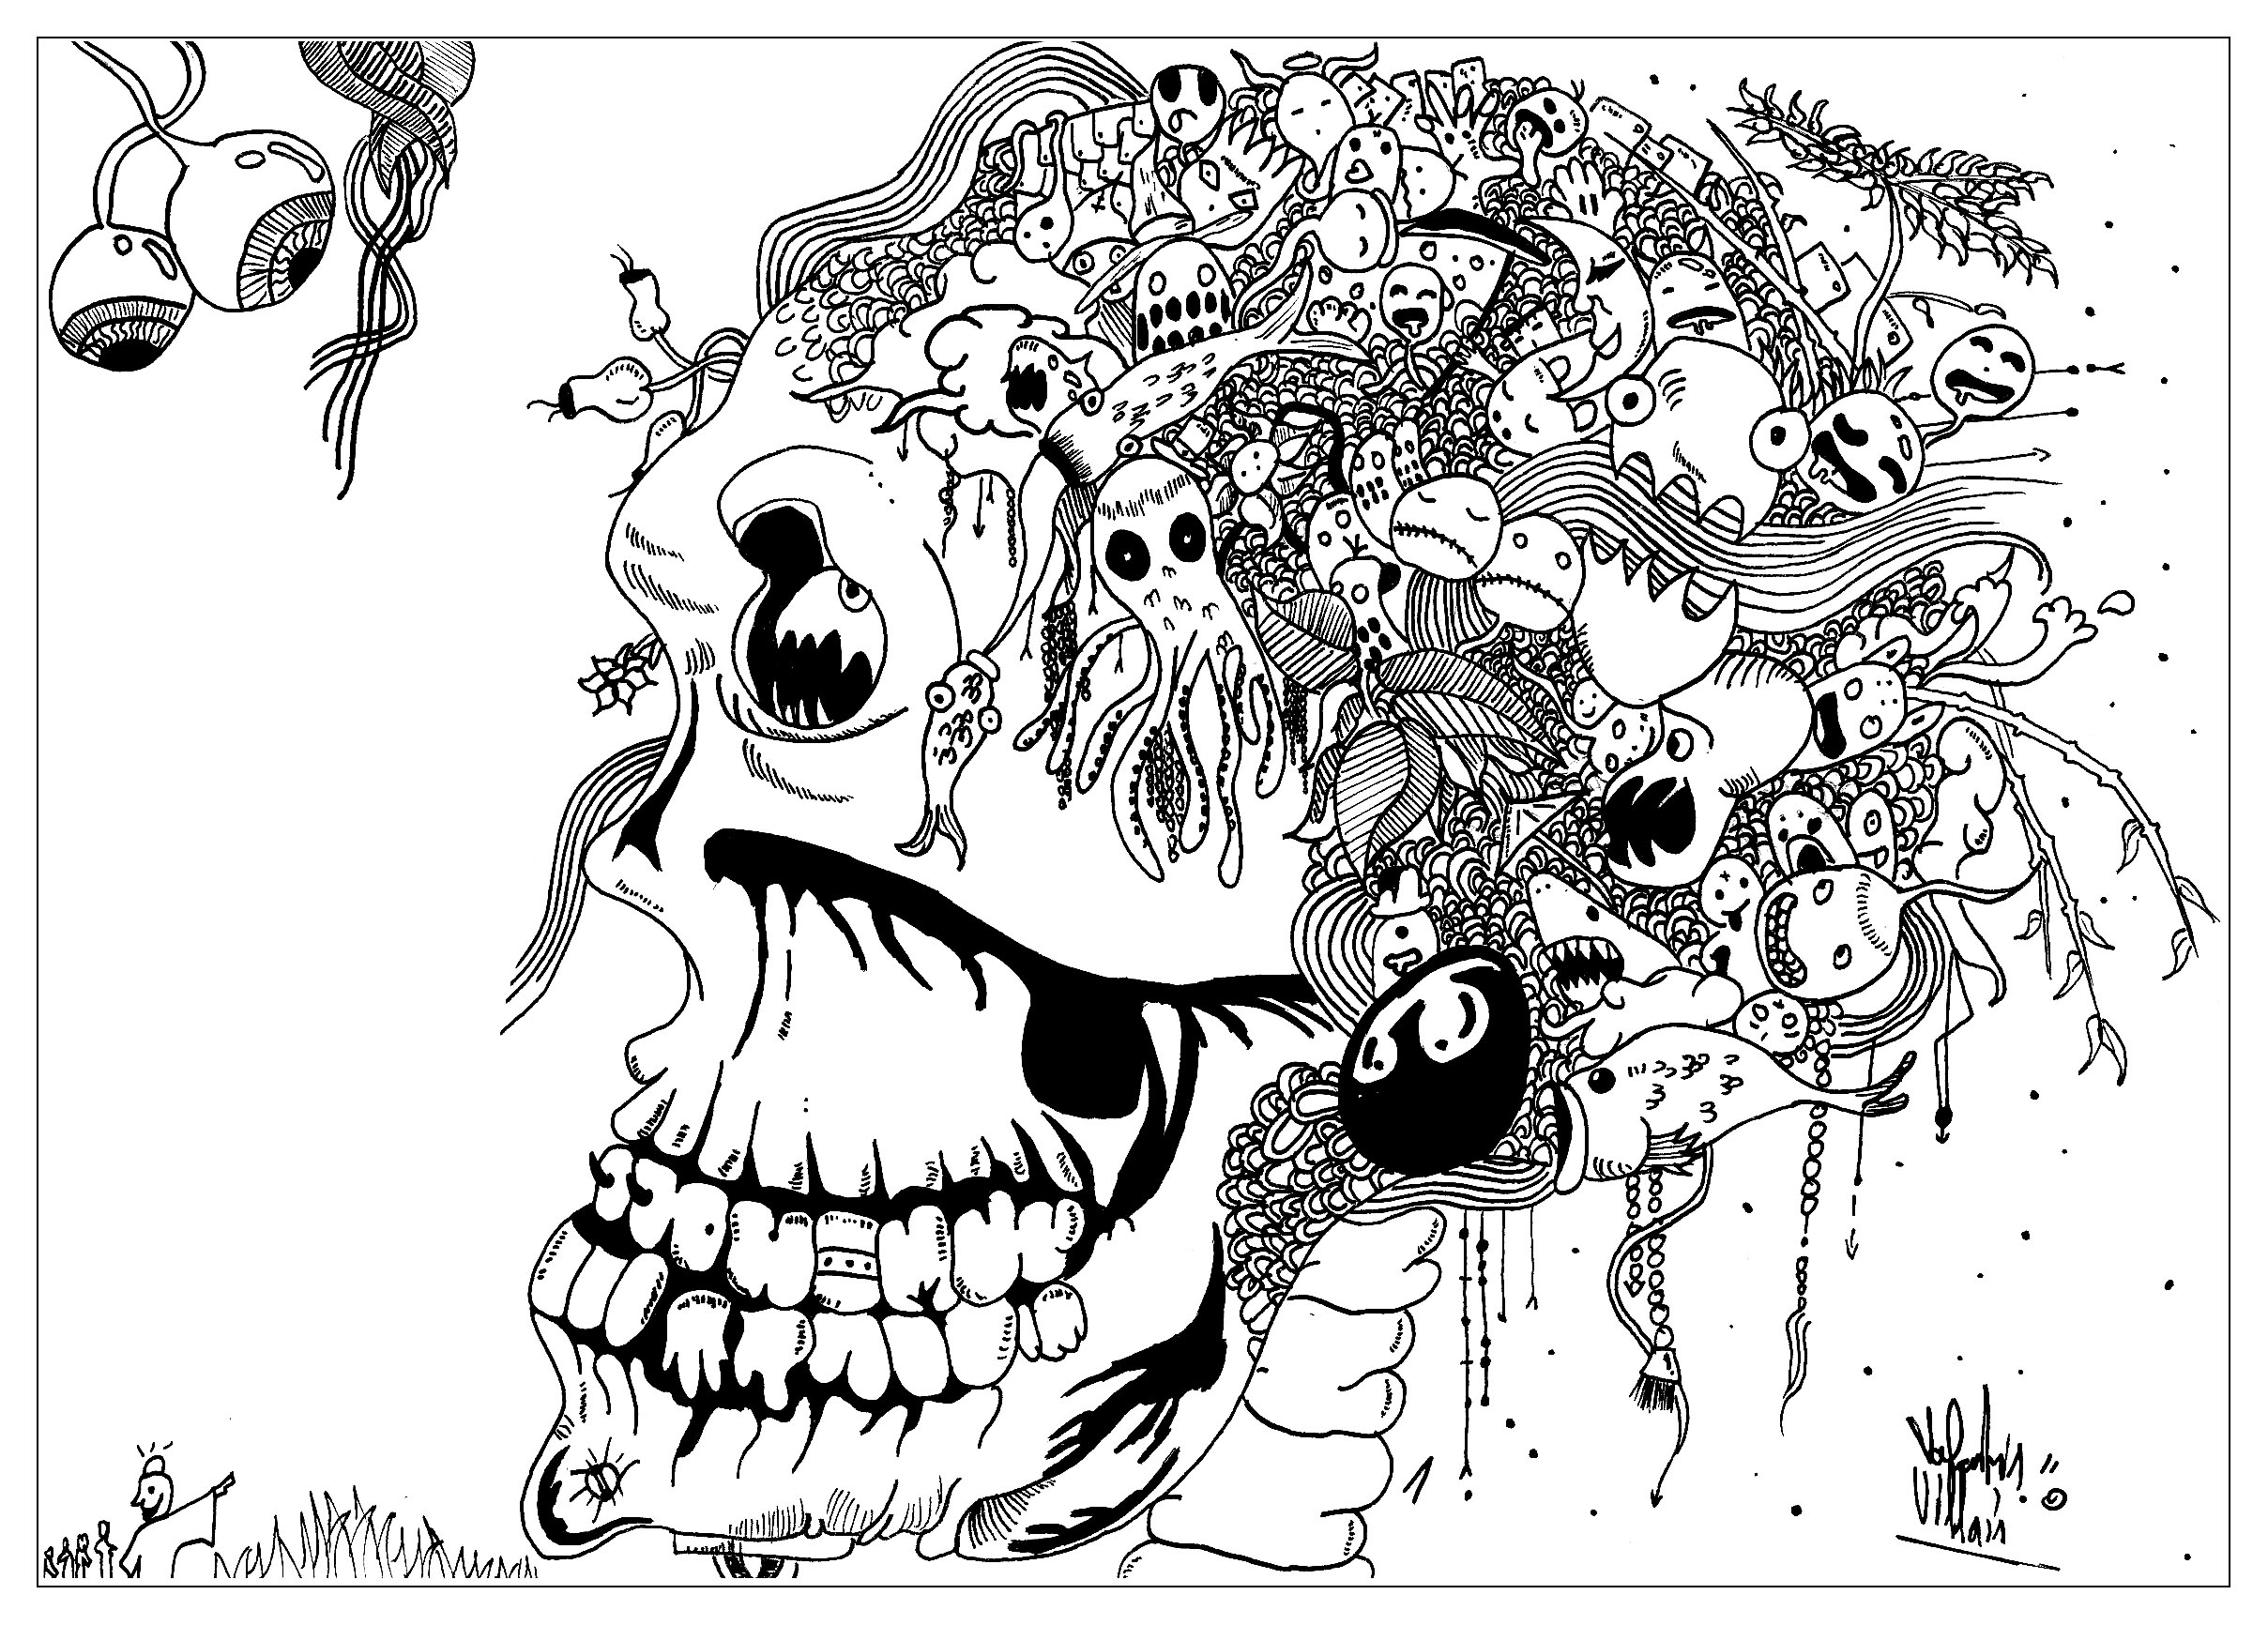 Different weird and evil creatures coming out of a skull ... a scary Doodle !, Artist : Valentin